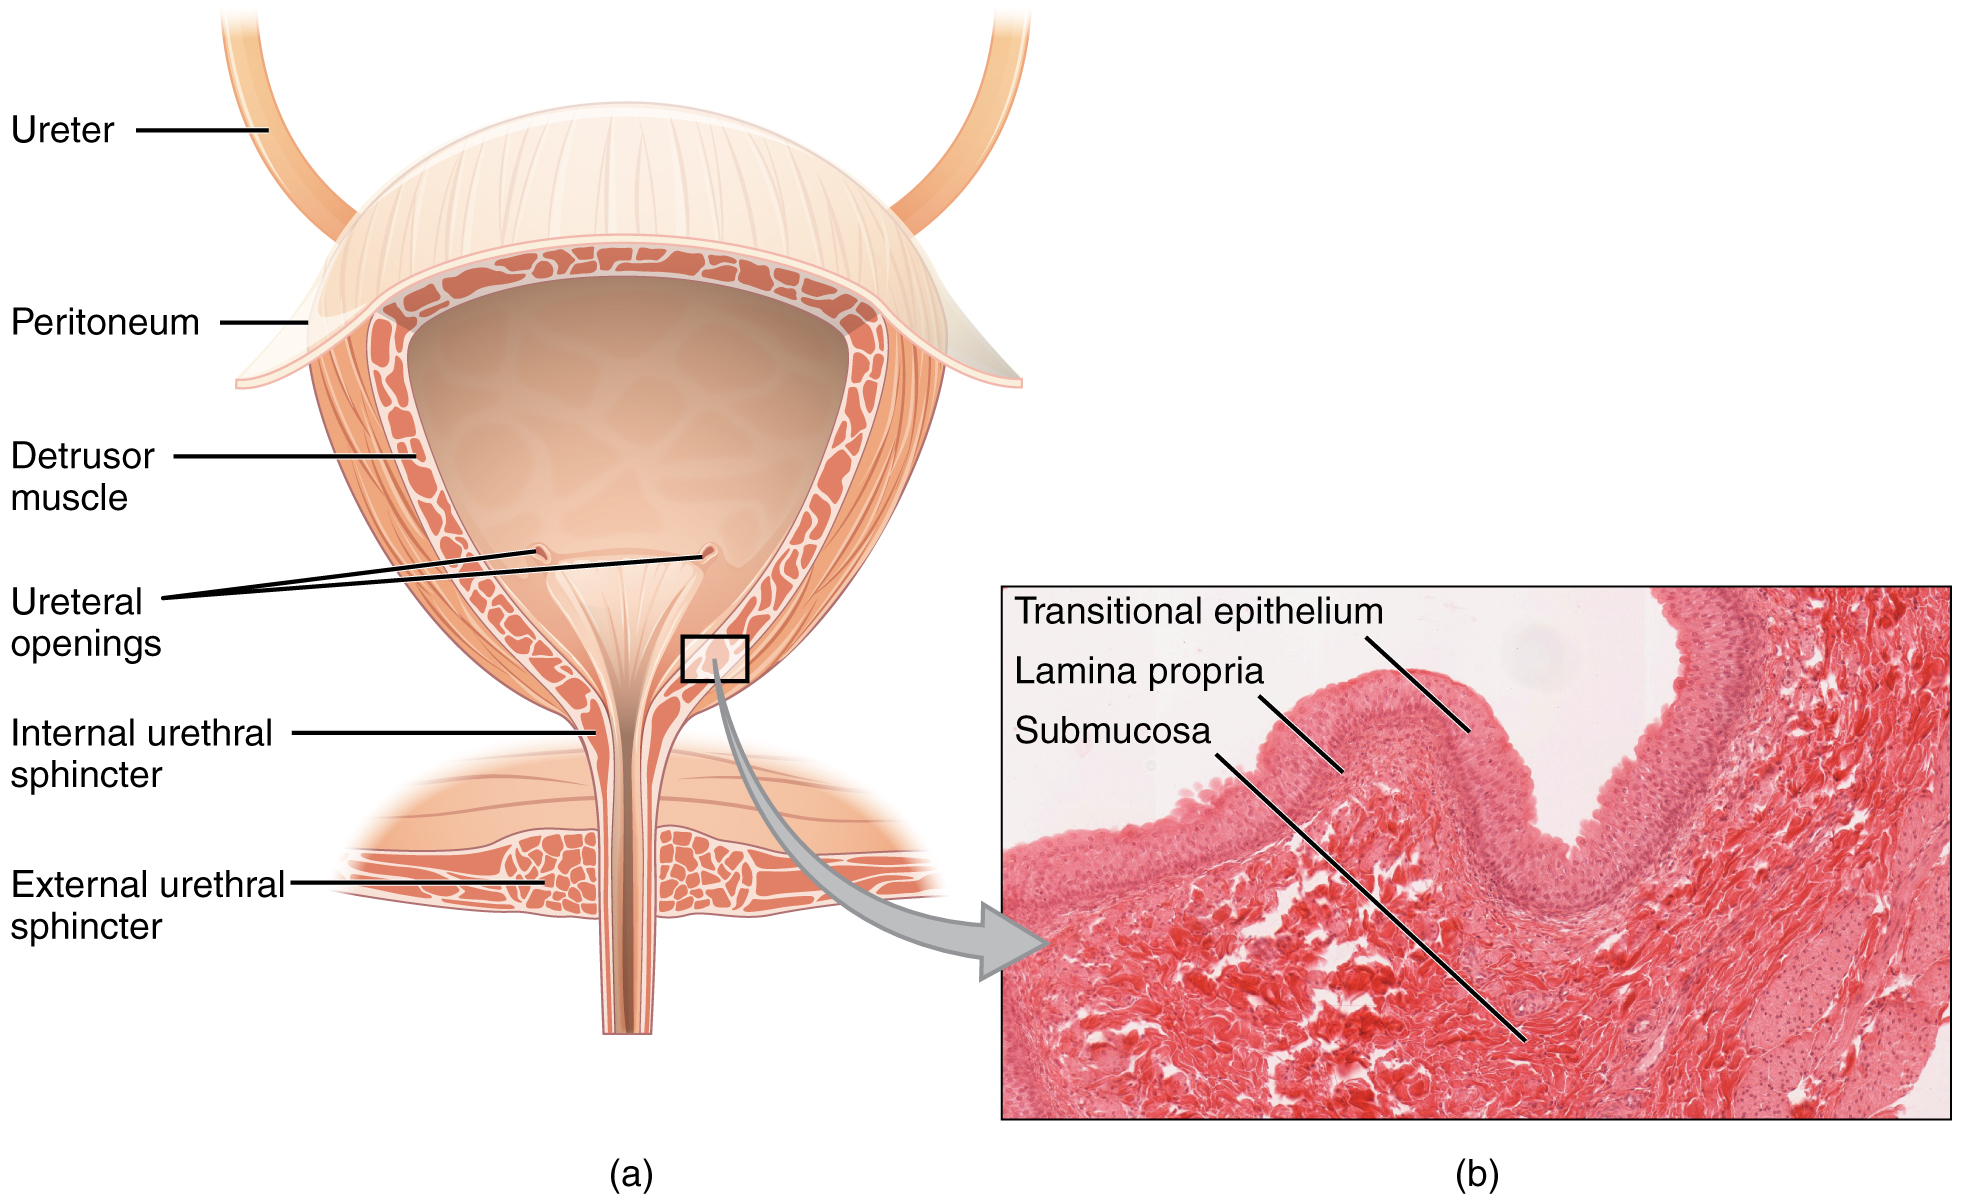 Cross-section of the bladder. Image description available.